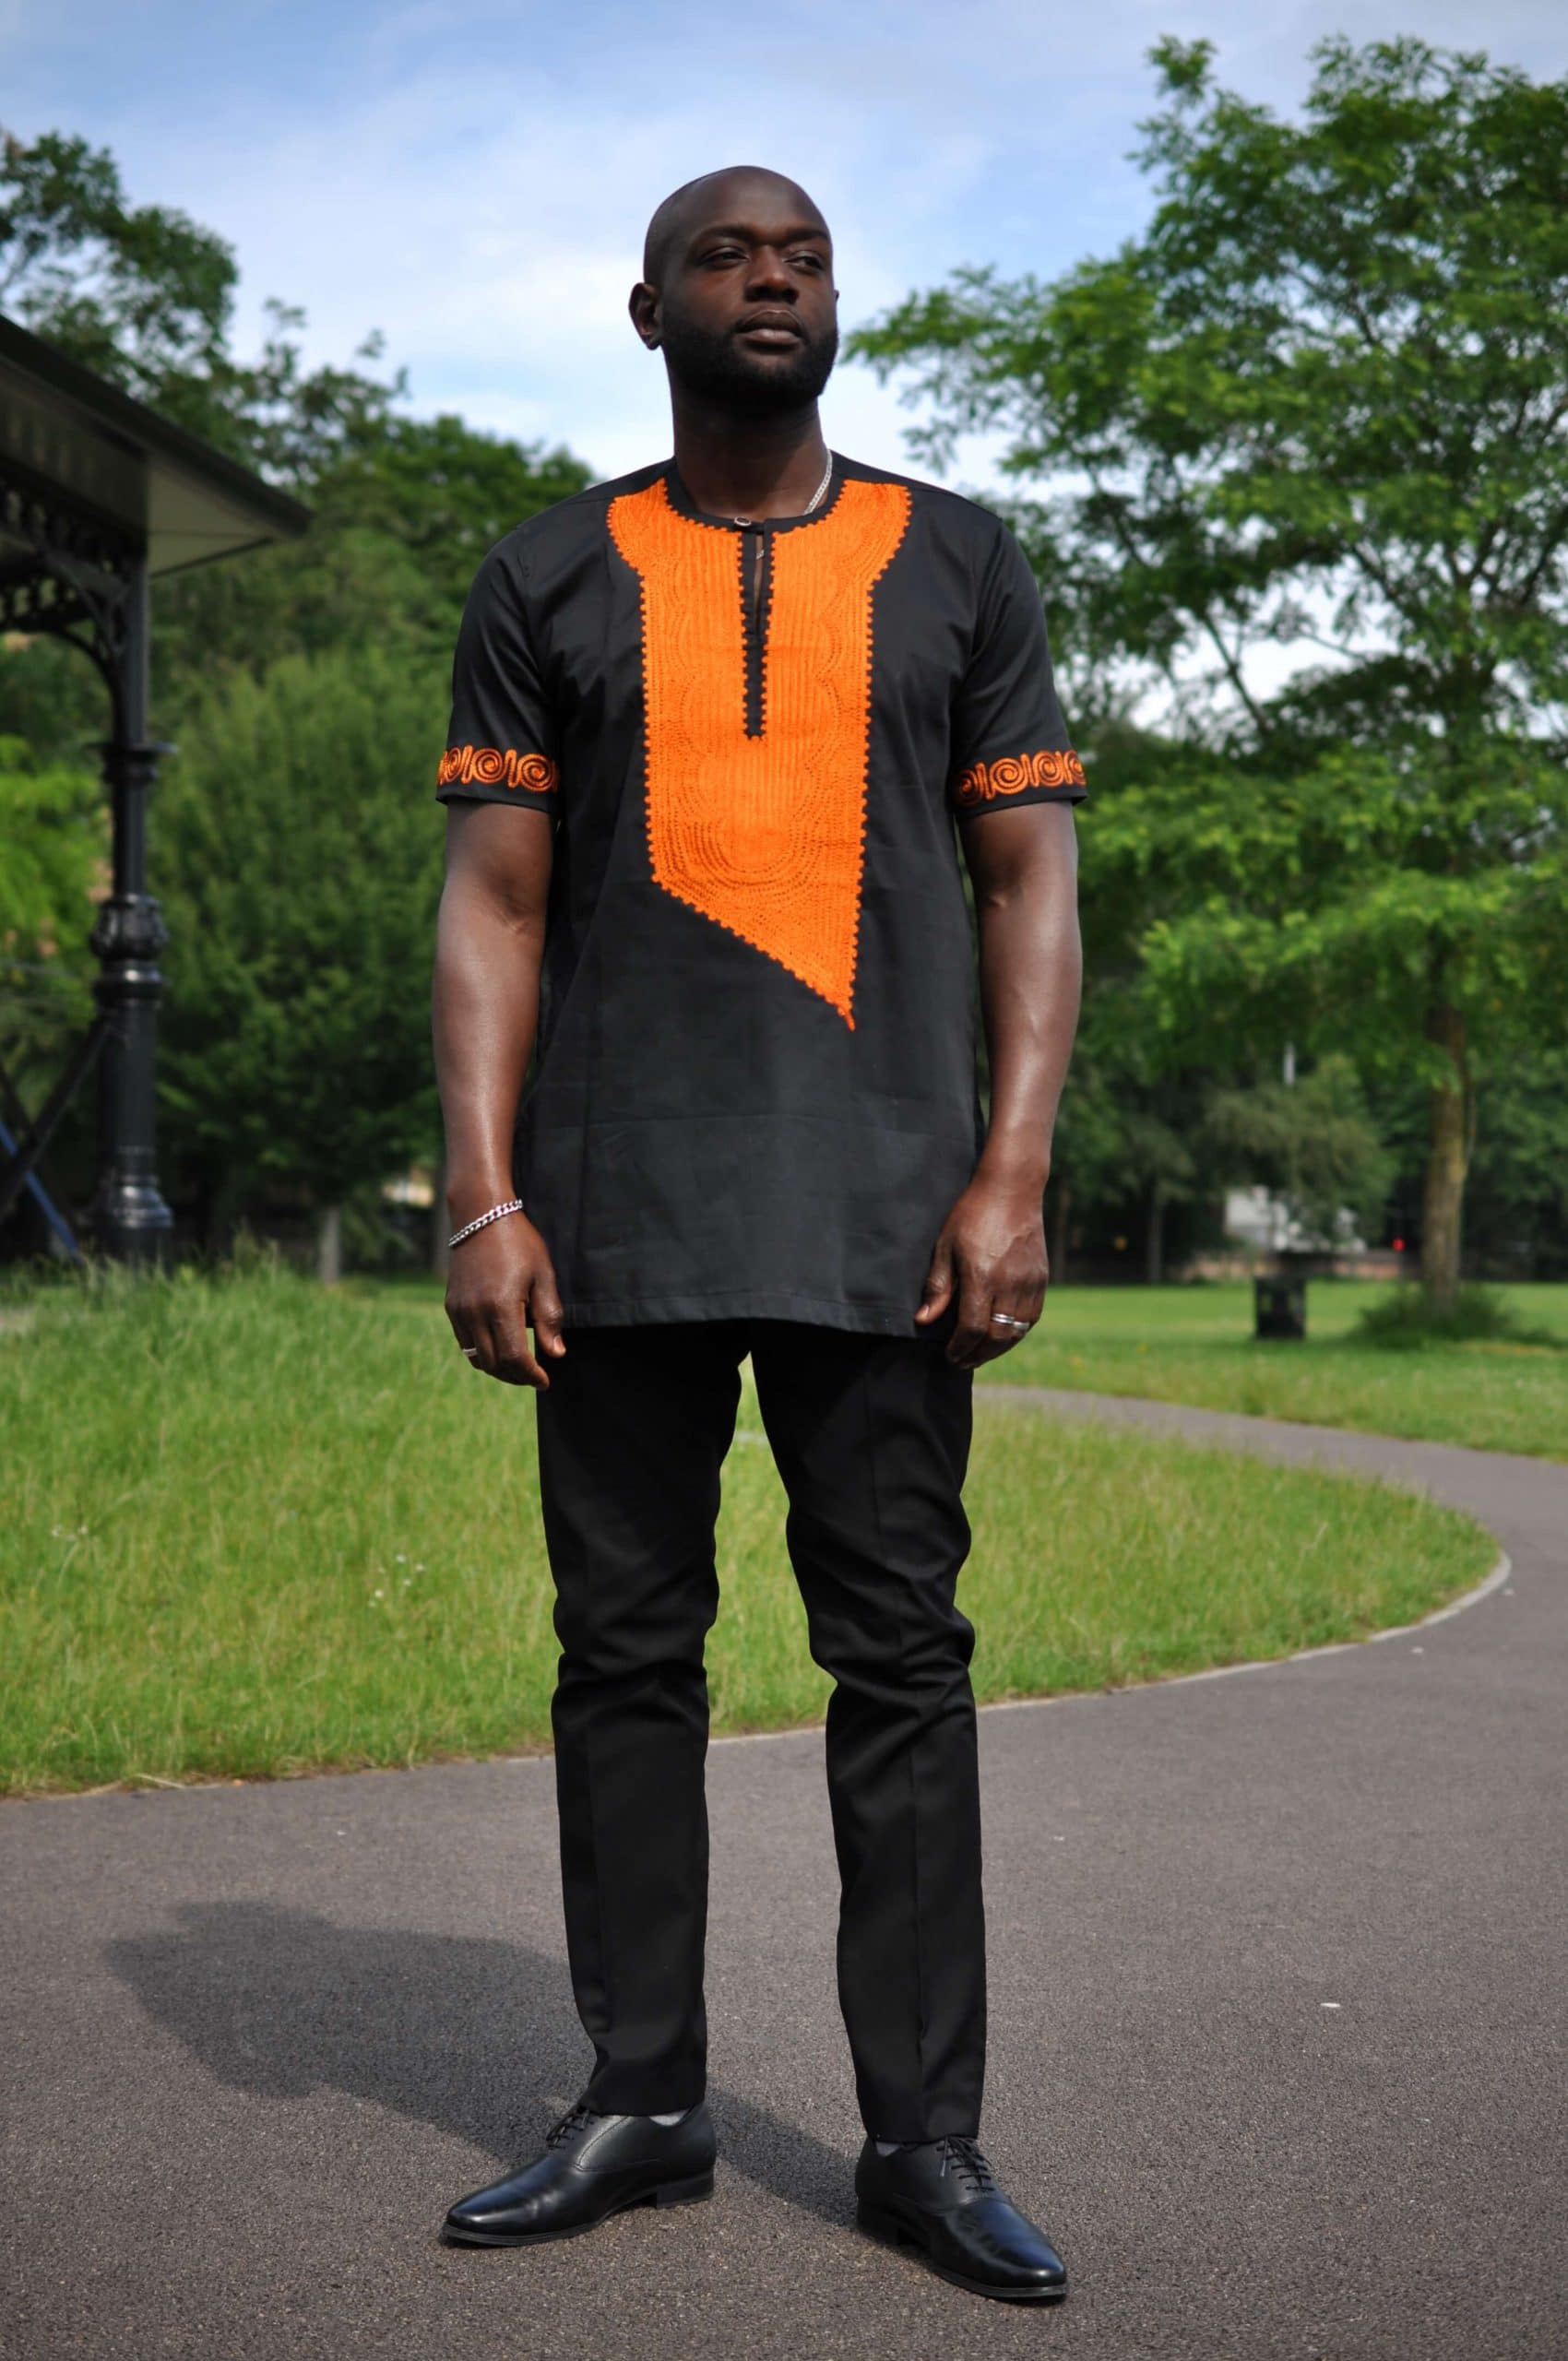 Frontal of model wearing a traditional African black shirt with vibrant orange embroidery.